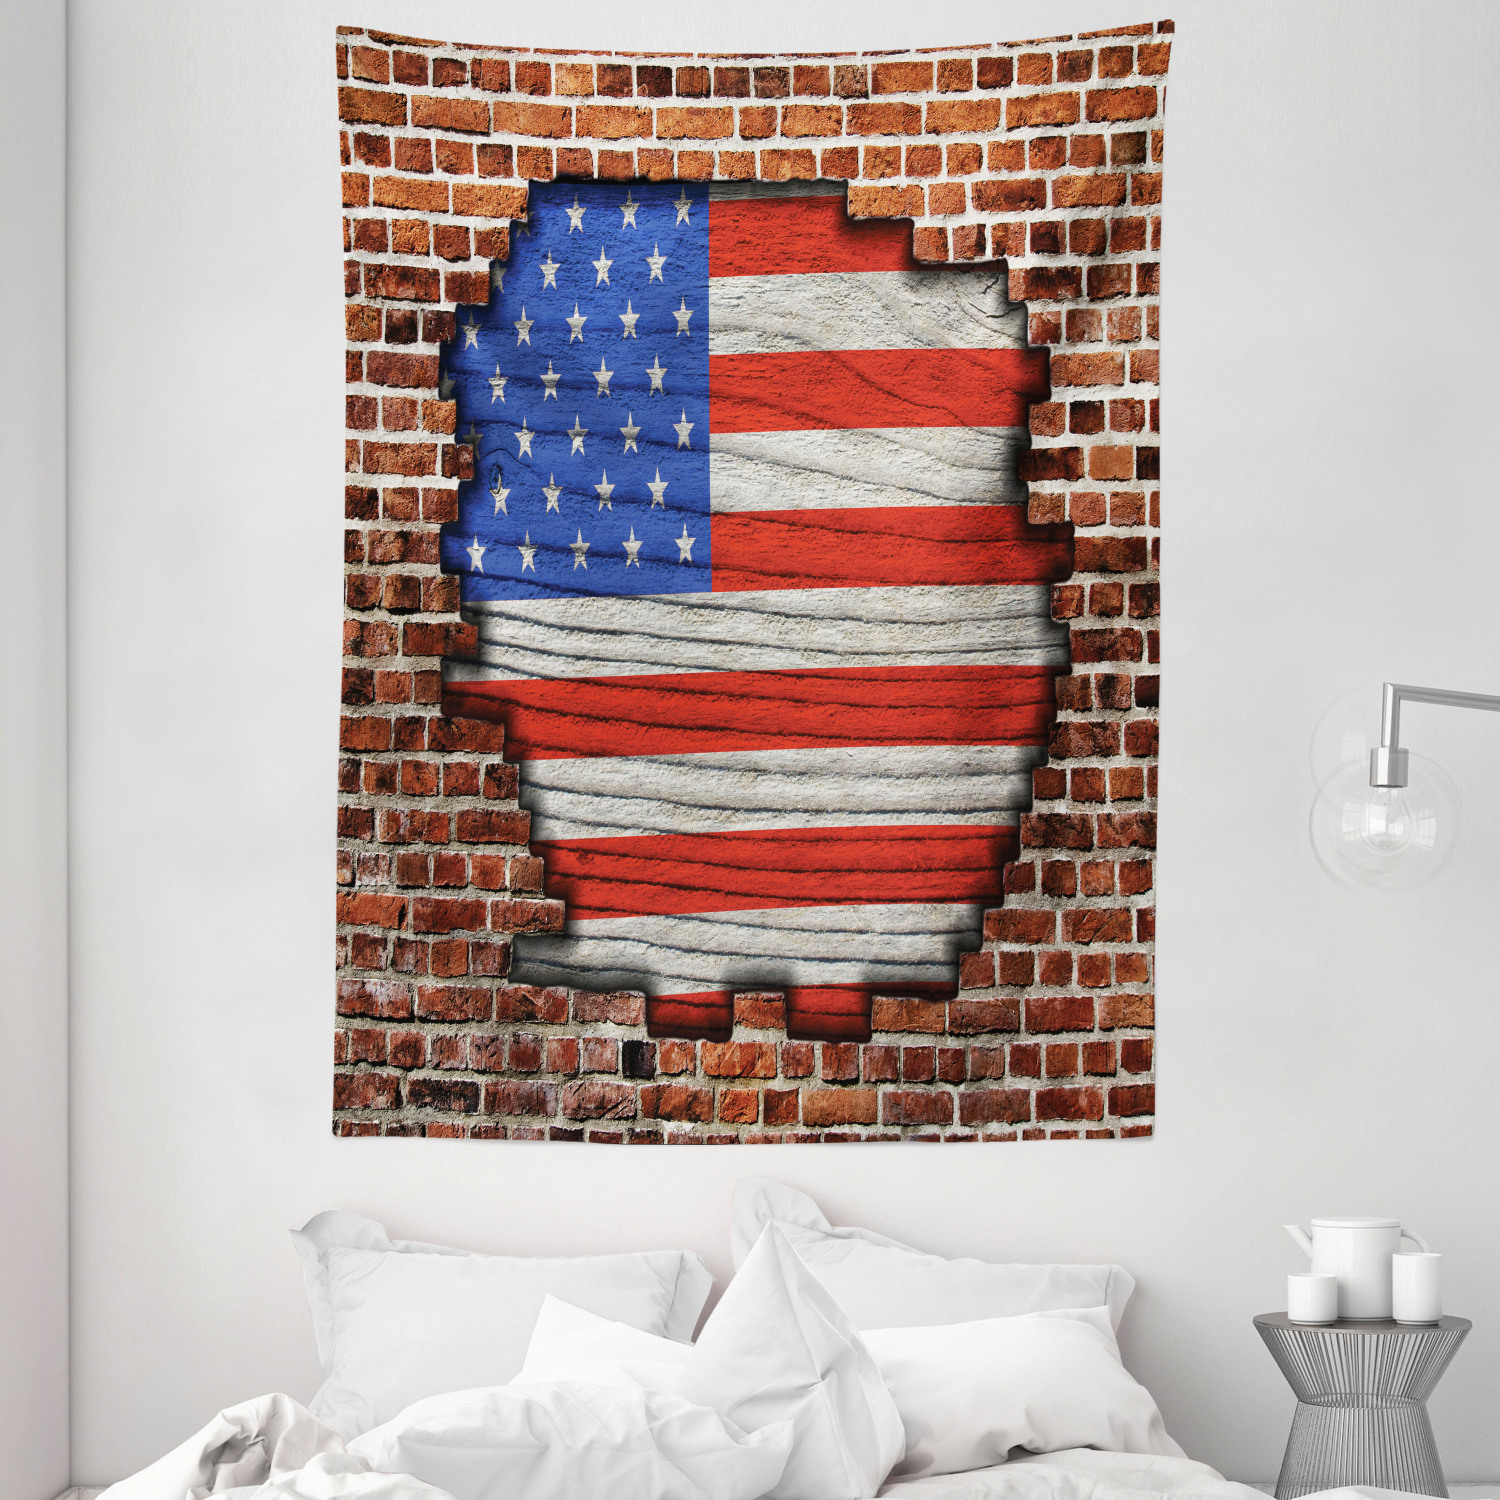 Early Modern Flag Tapestry National Flag Wall Hanging 100cmx125cm Decor Wall Art 